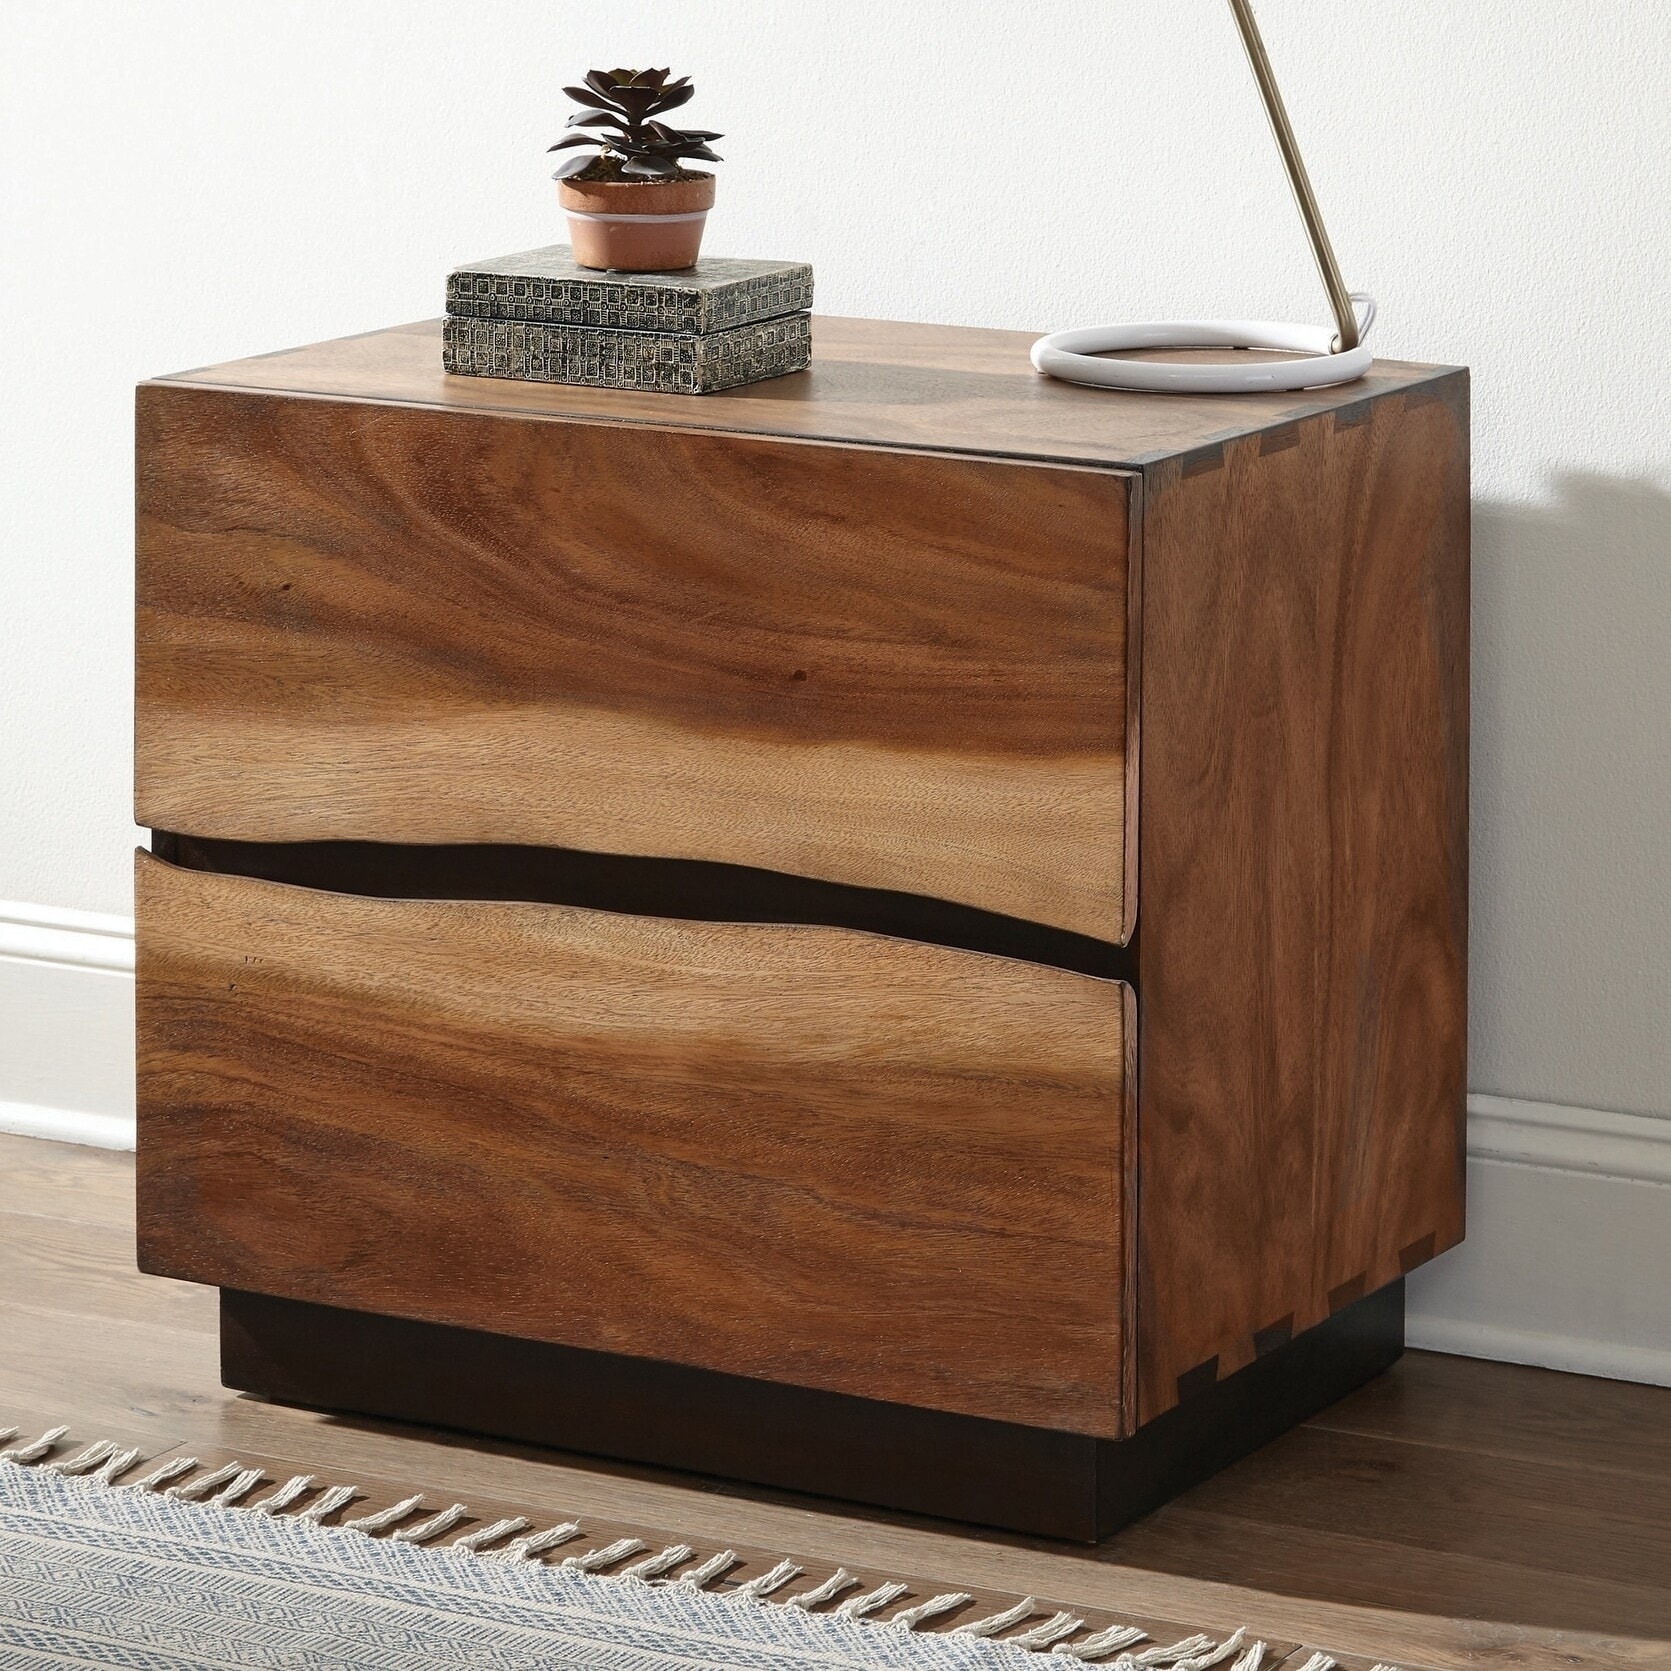 Endy® Solid Wood Nightstands, Walnut Finish